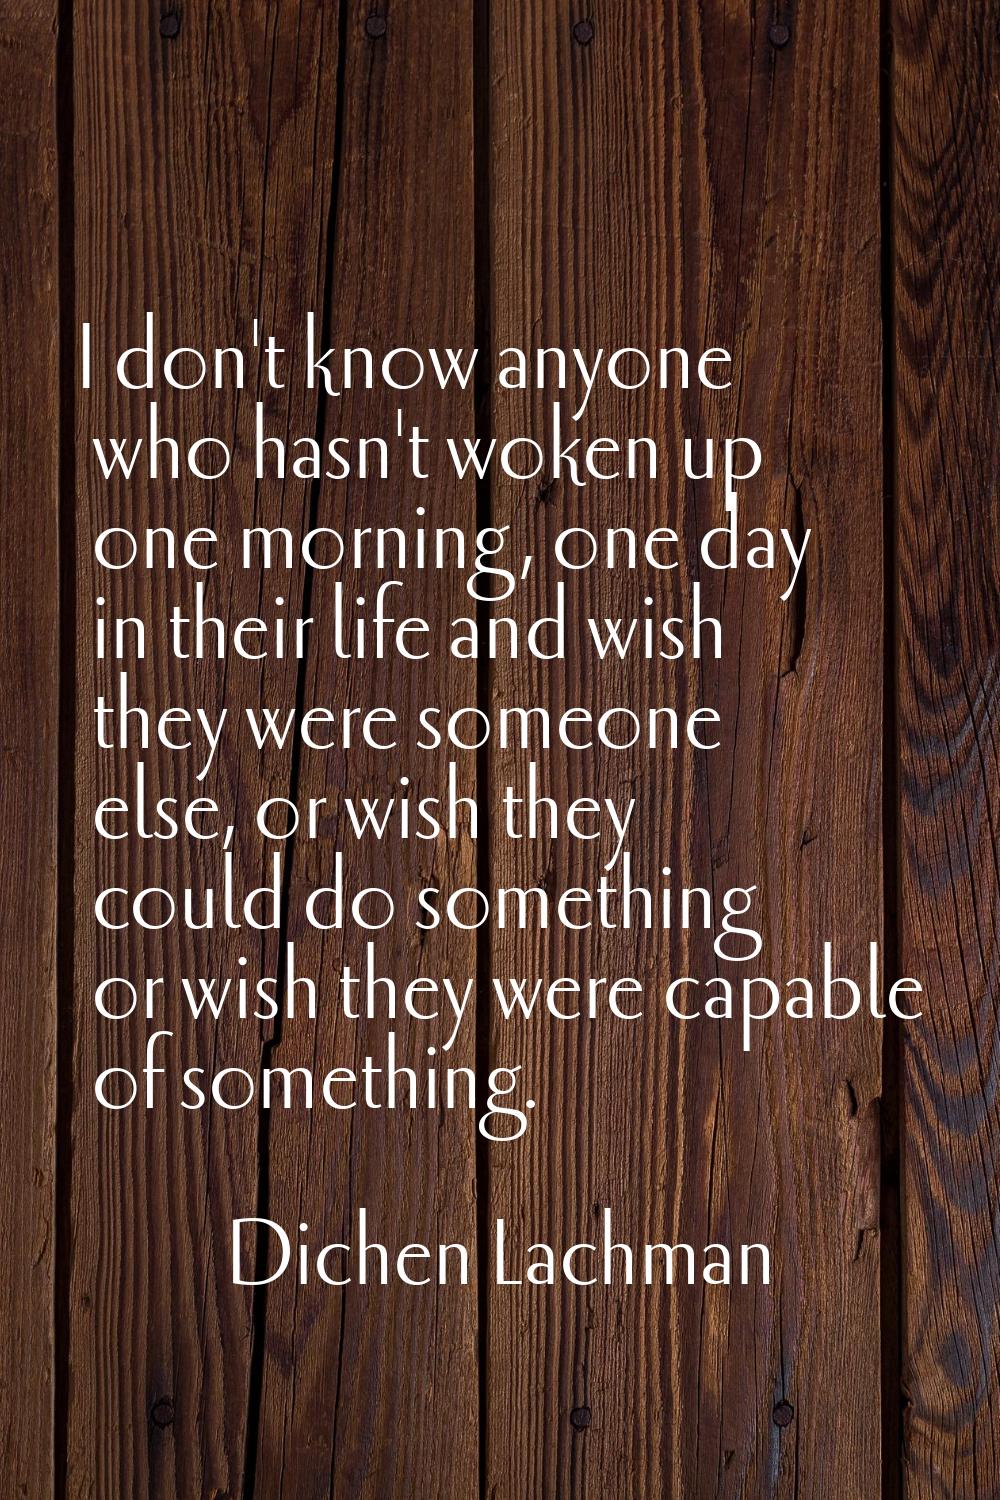 I don't know anyone who hasn't woken up one morning, one day in their life and wish they were someo